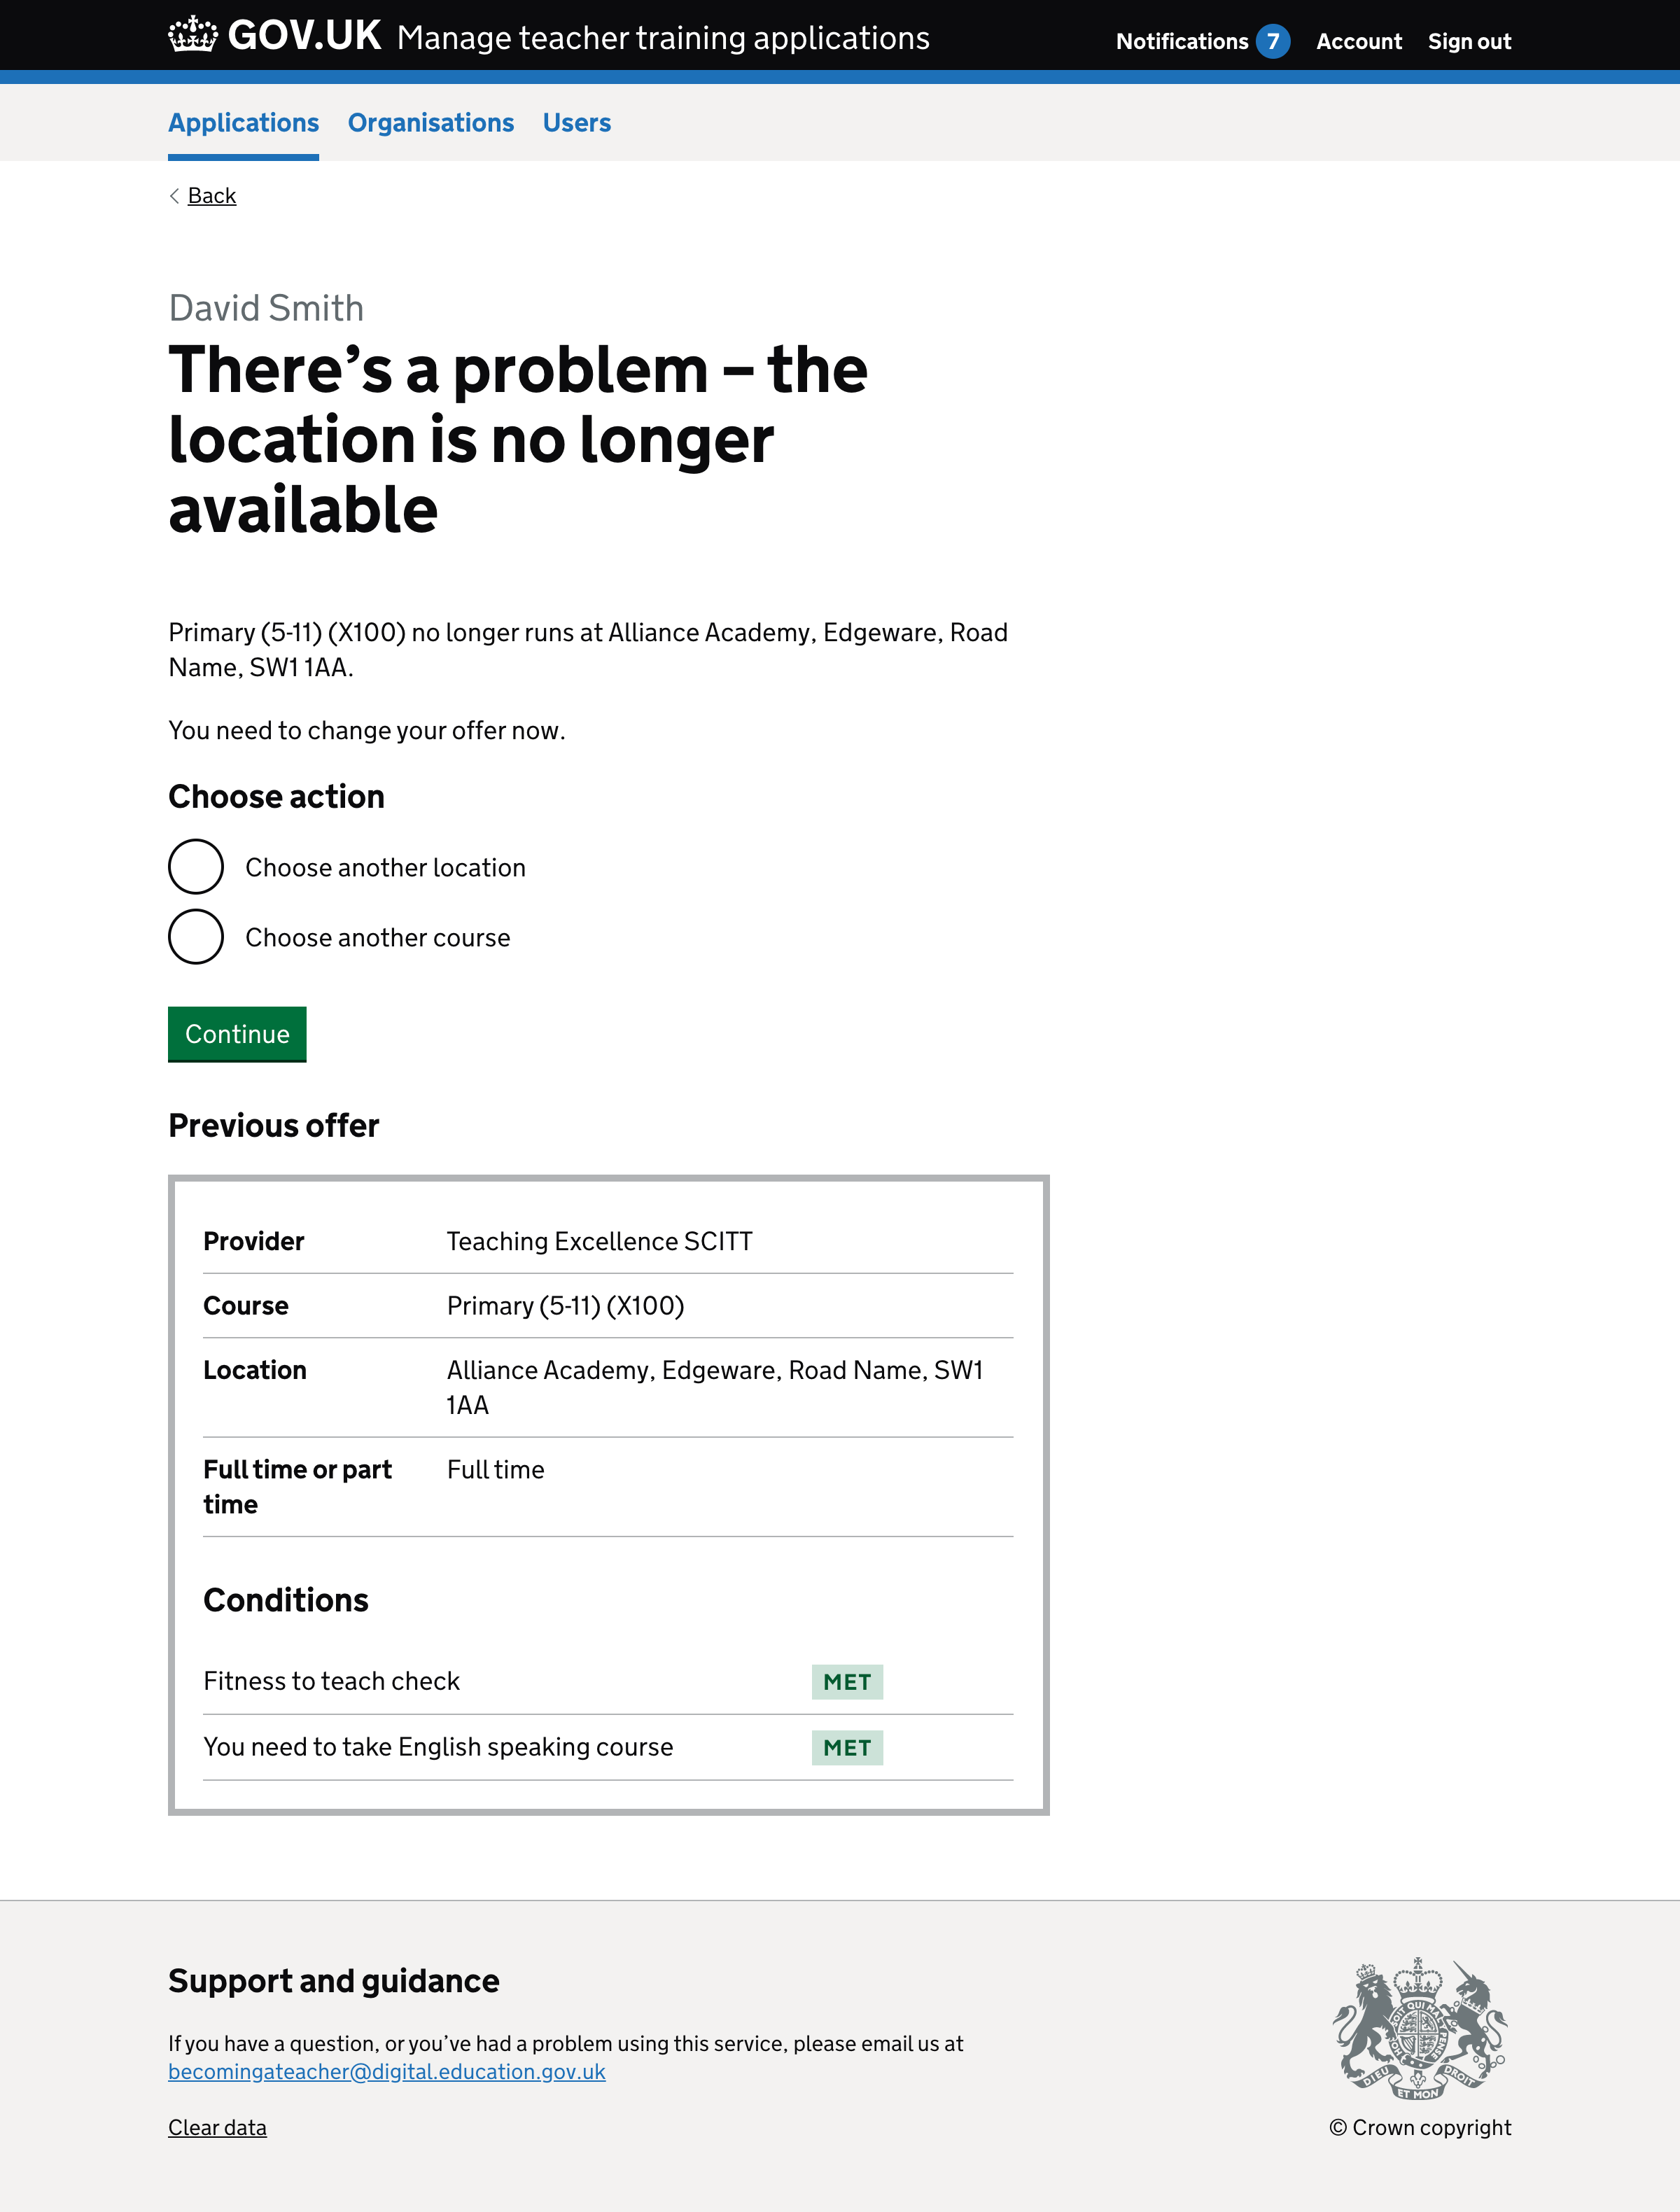 Screenshot of page with title ‘There’s a problem – the location is no longer available’.